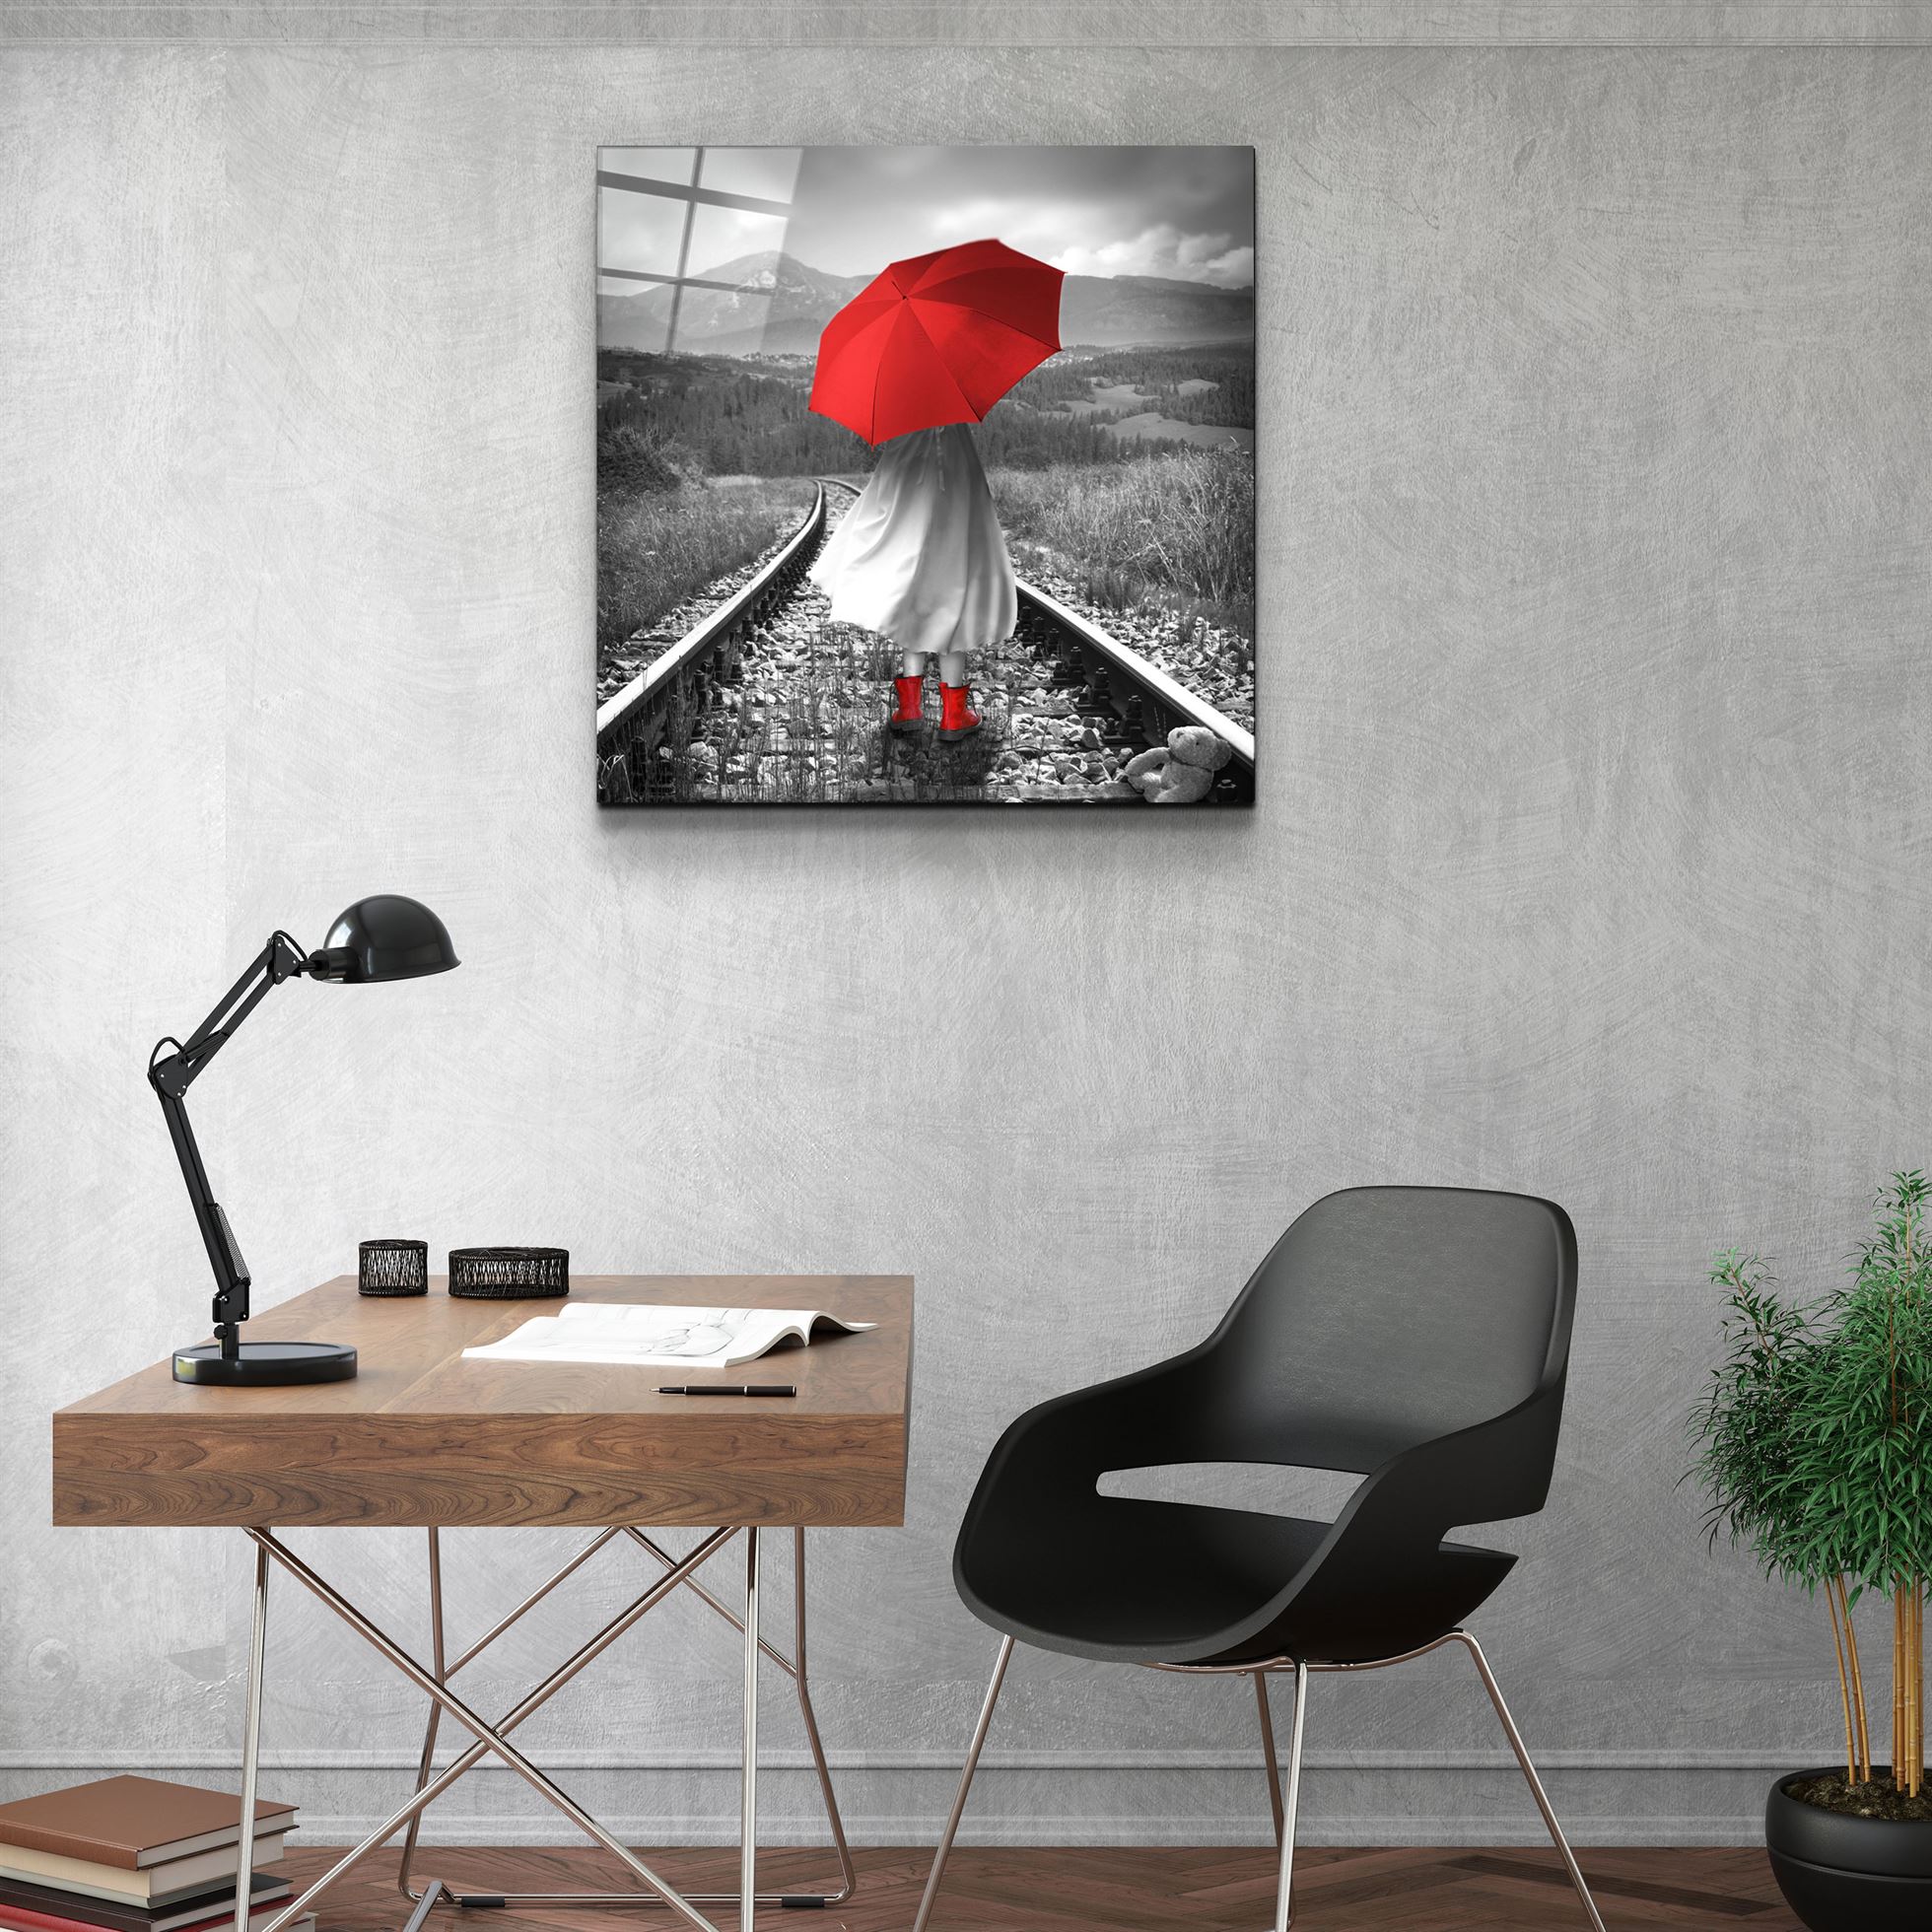 ・"Girl with Red Umbrella"・Glass Wall Art